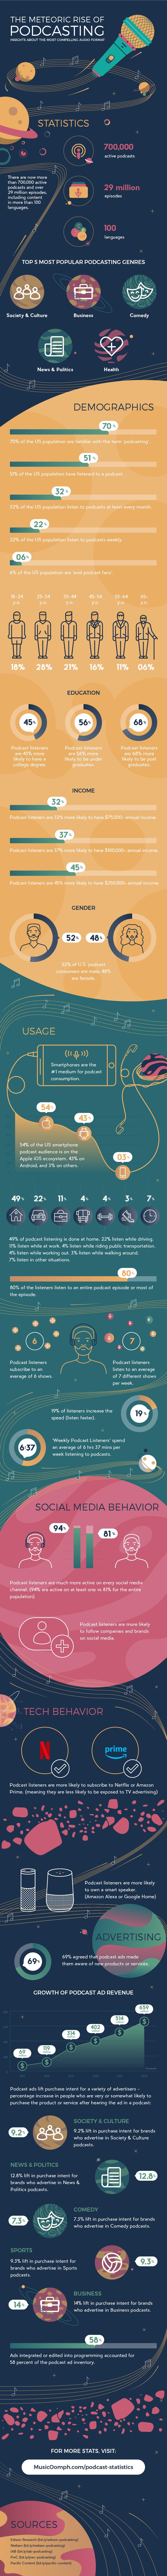 Podcast Infographic